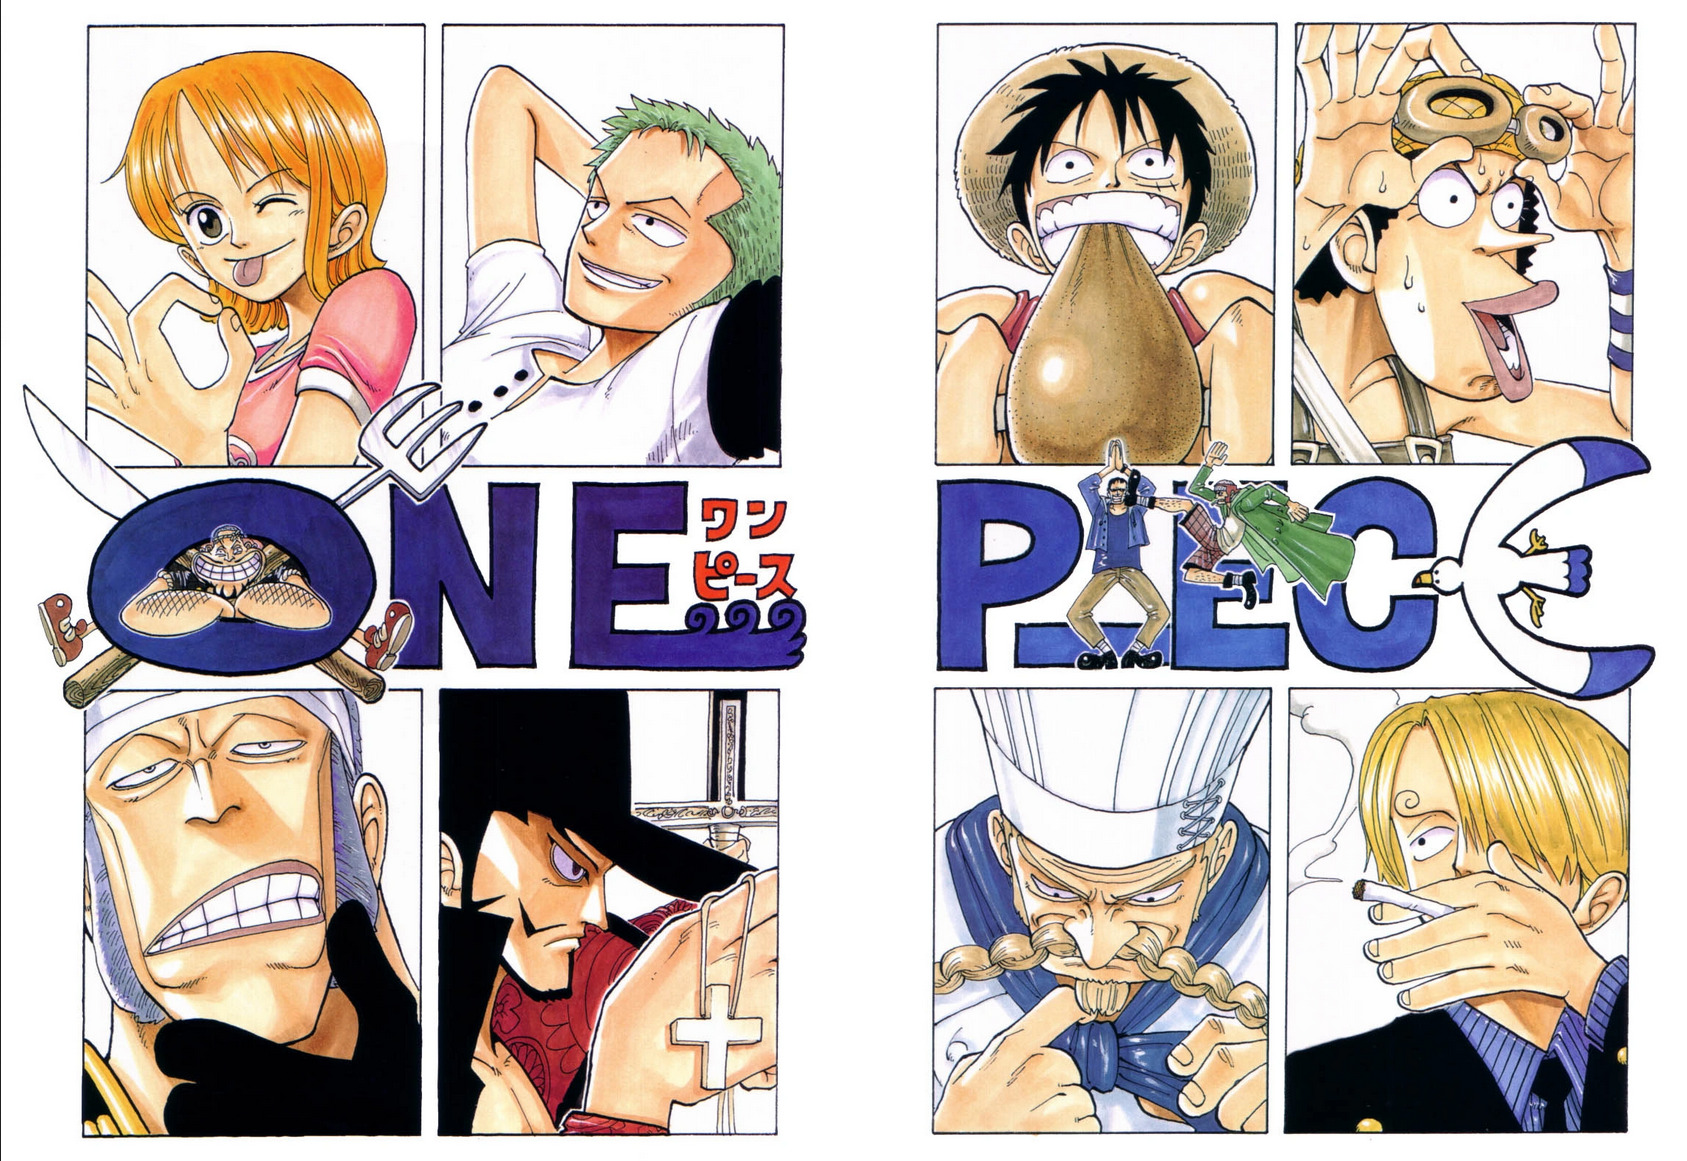 The Straw Hats and their adversaries thus far on Eiichiro Oda's color spread to One Piece Chapter 52 "The Oath" (1998), Shueisha.